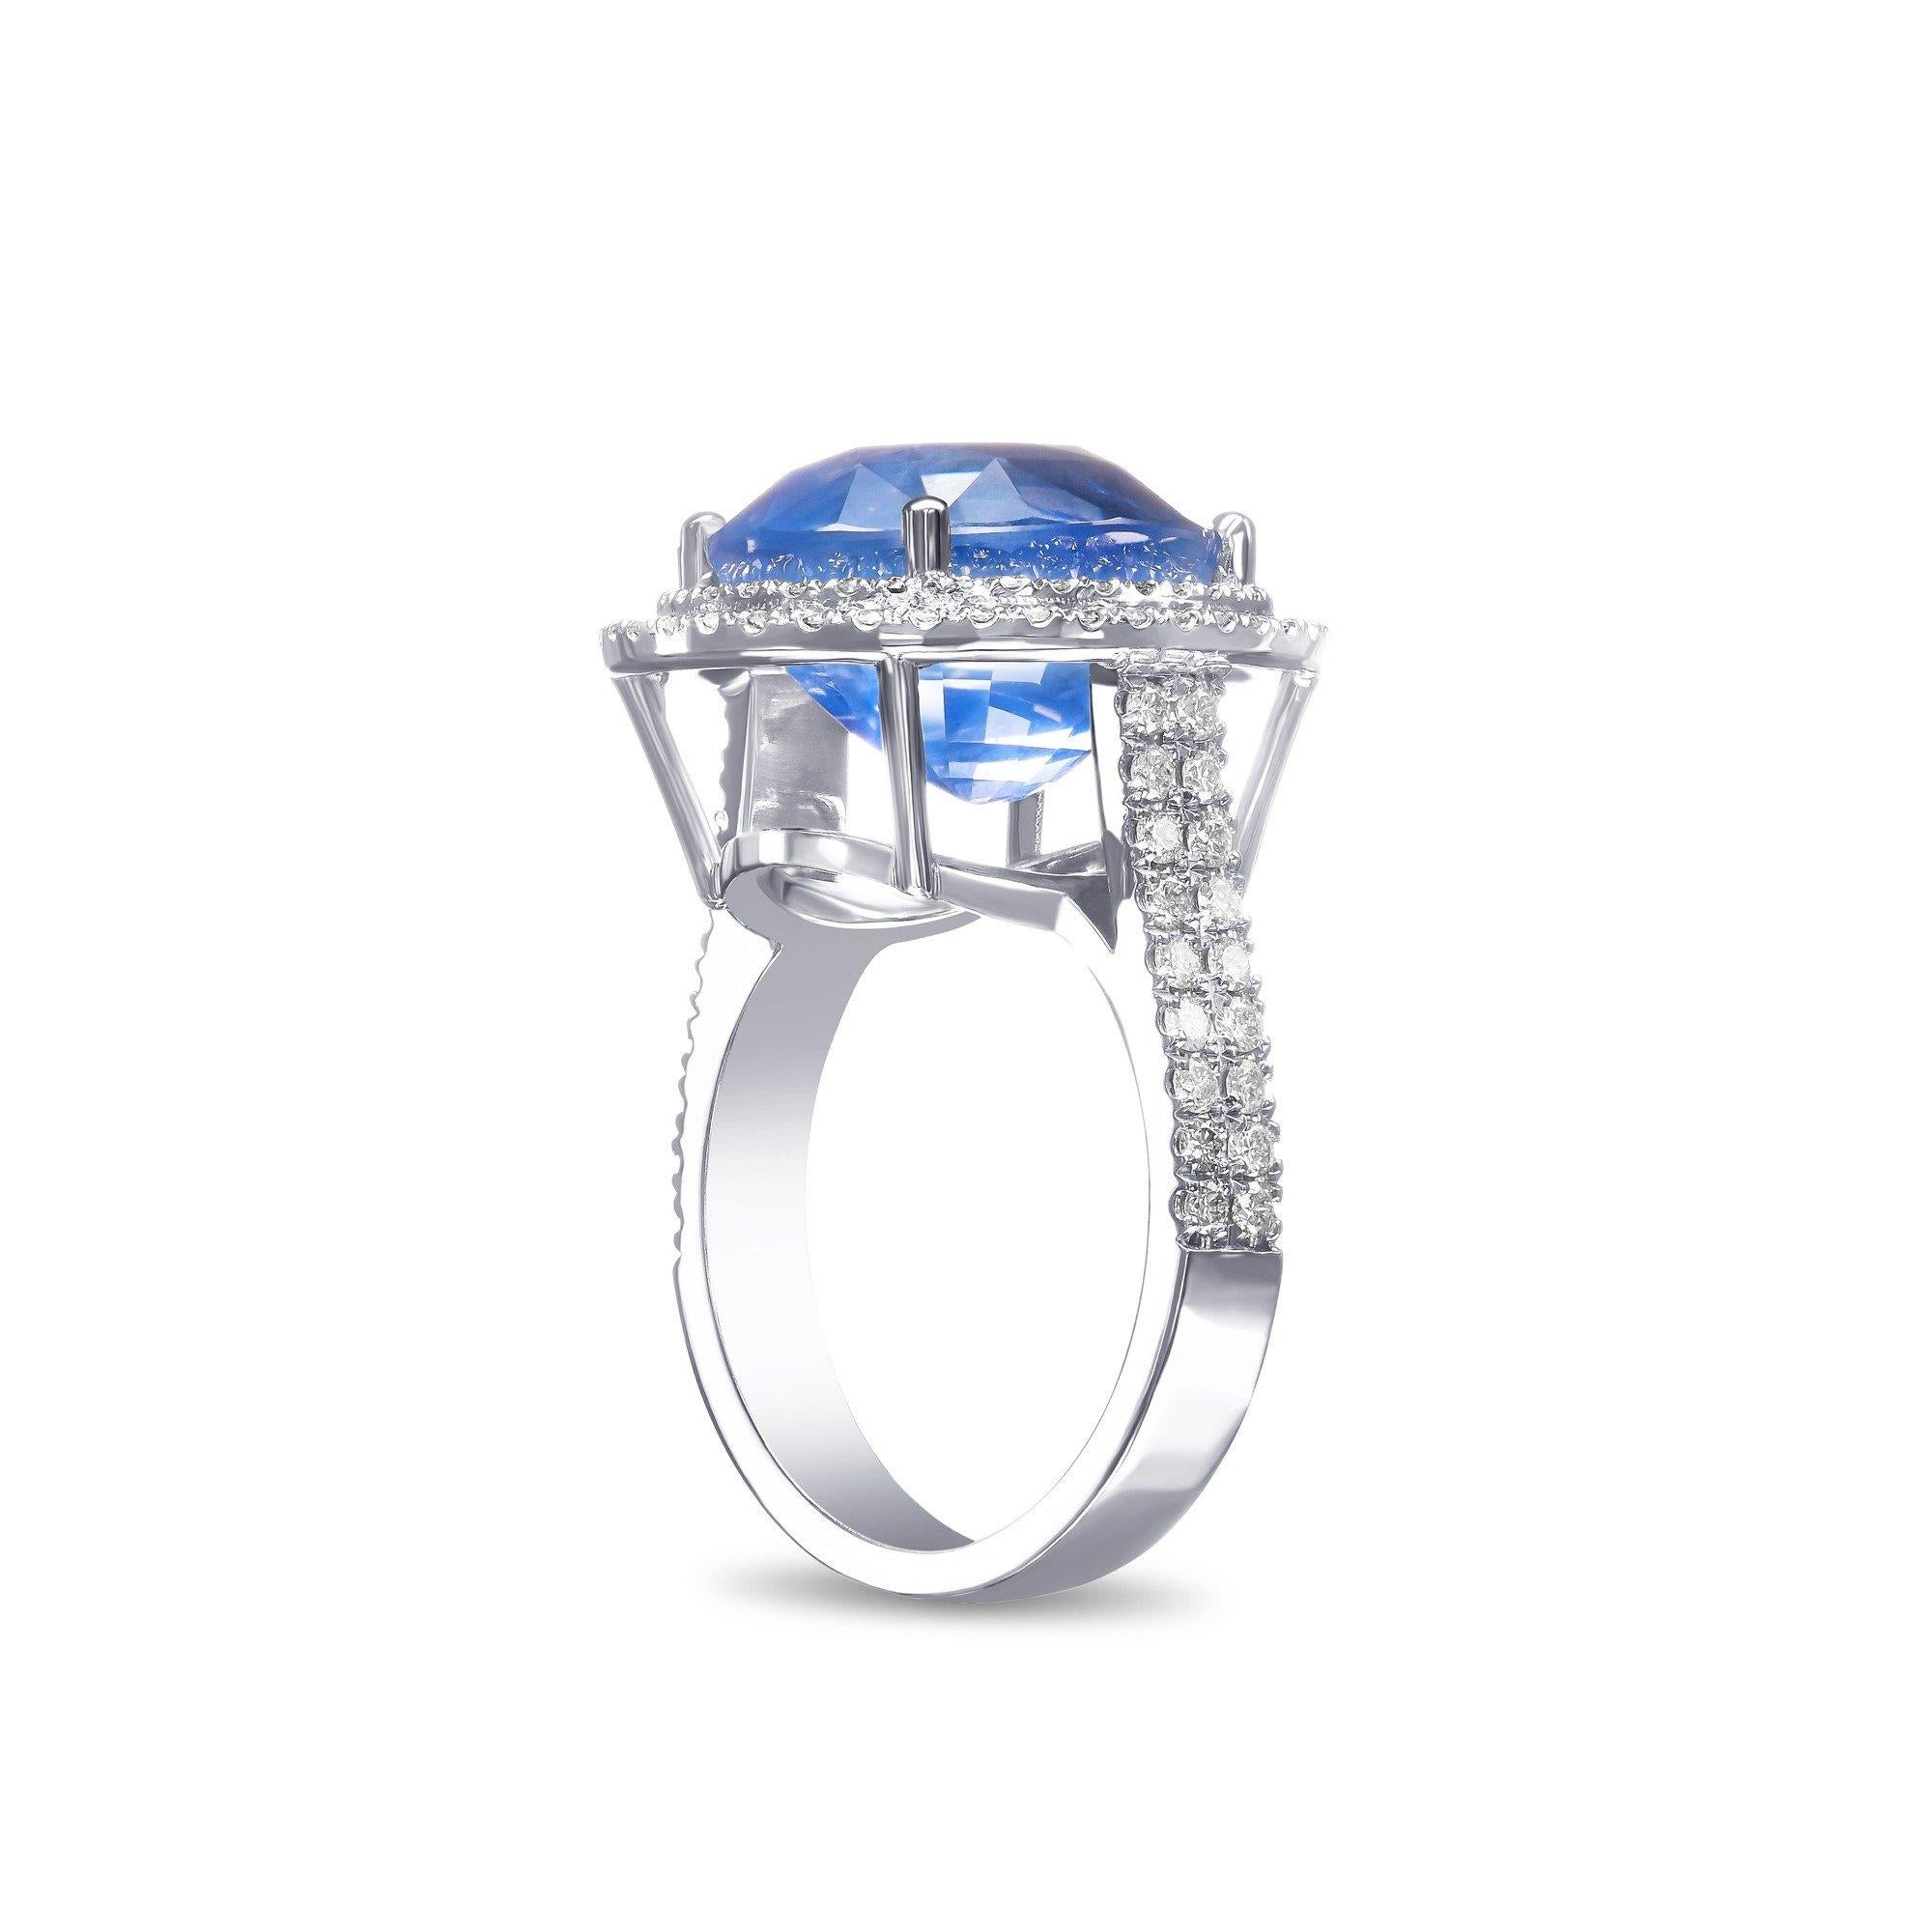 Ring can be sized free of charge prior to shipping out.    

Center Natural Sapphire:
Weight: 14.35 carat
Color: Violetish Blue 
Shape: Oval Mixed
No Indications of heating

Side Stone:
___________
Natural Diamonds
Cut: Round Brilliant
Carat: 1.30